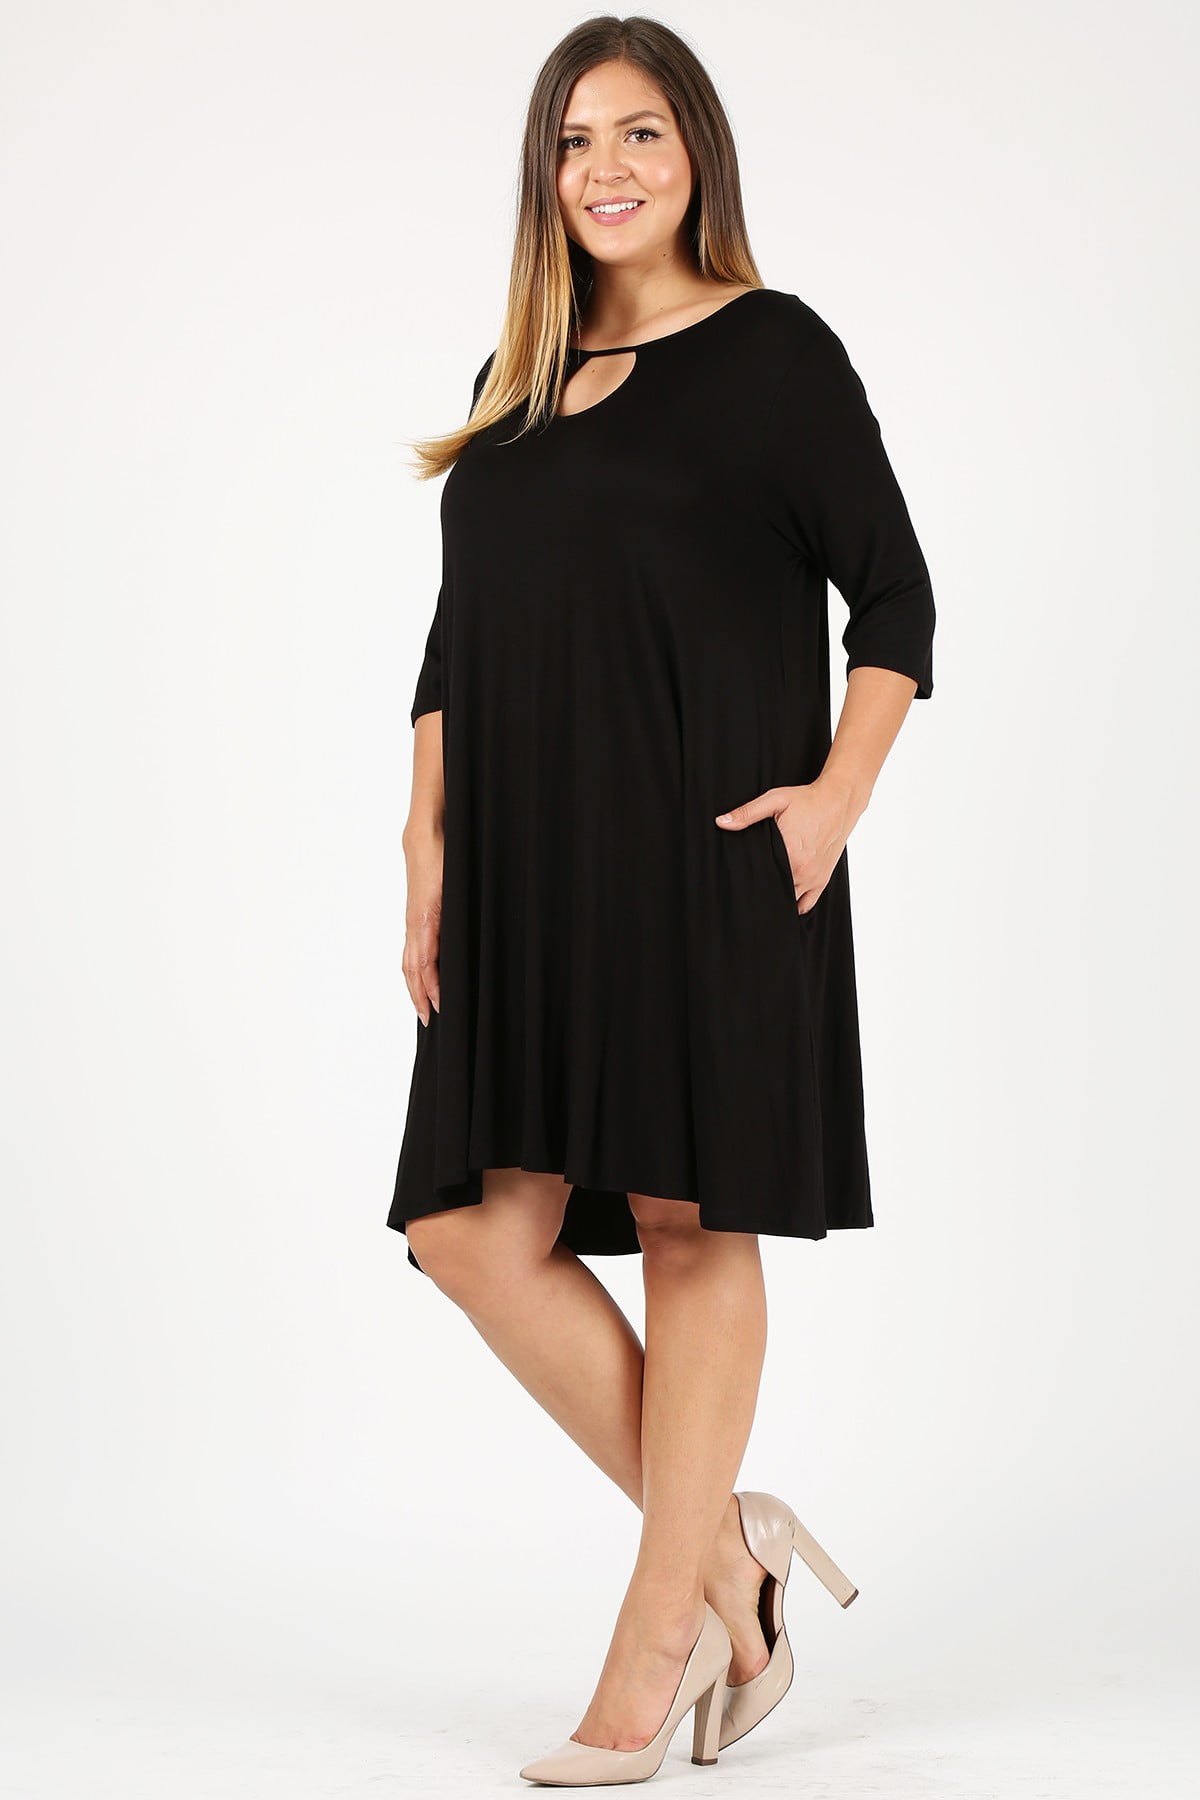 Sweet Lindsey - Women's plus size dress with a relaxed fit key-hole ...